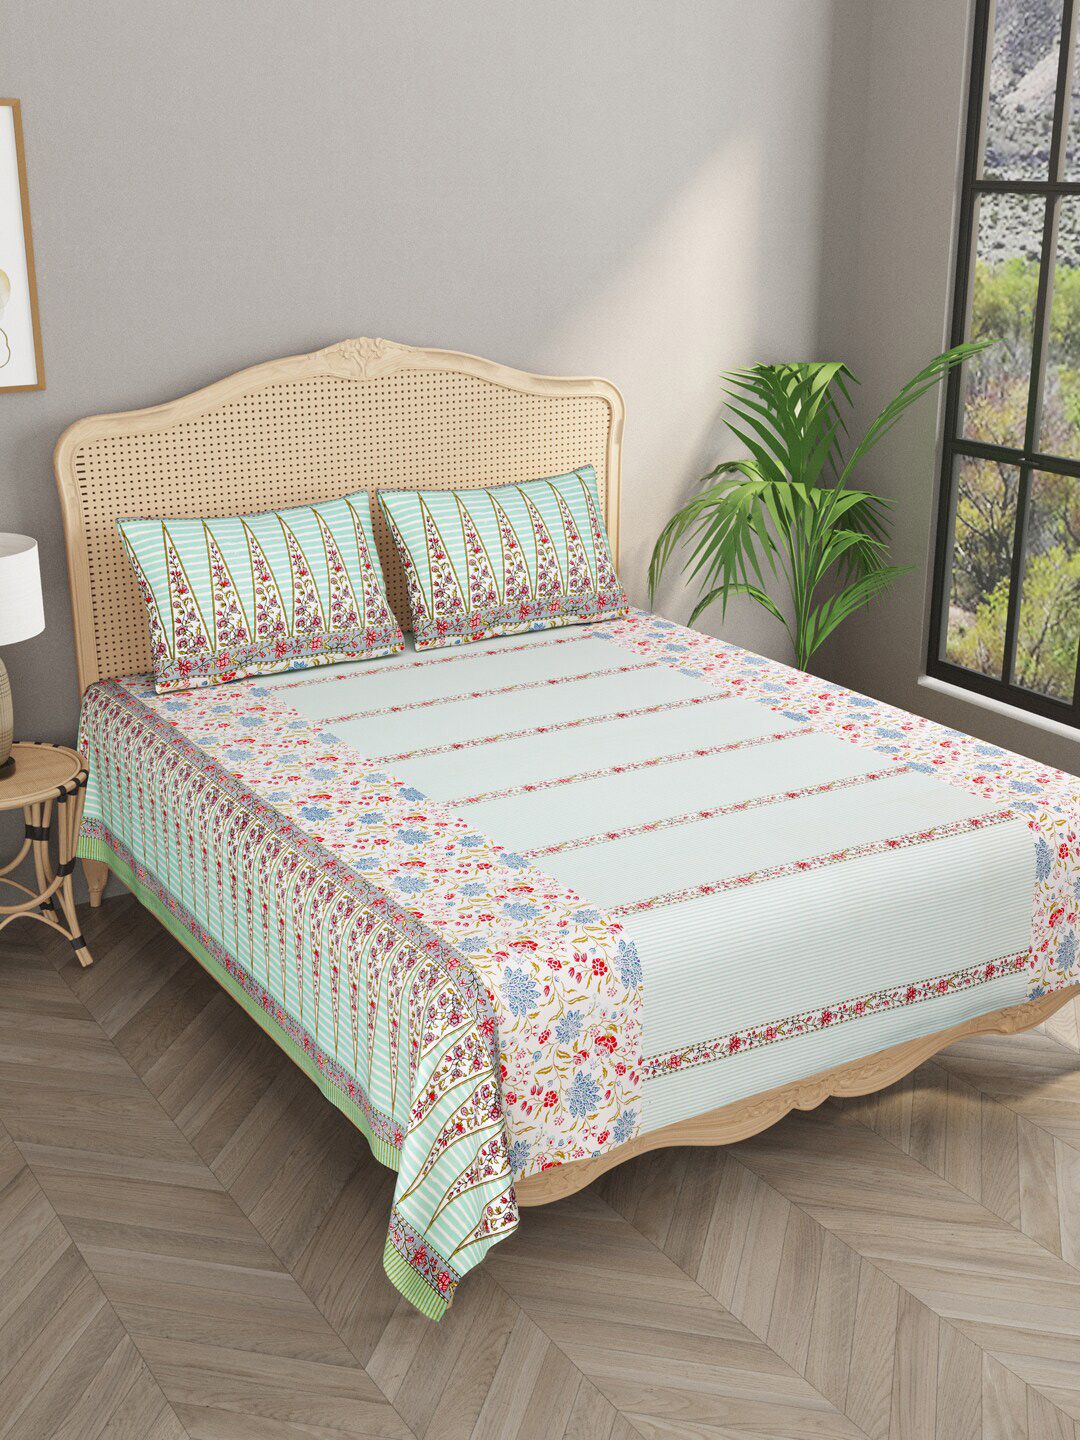 Gulaab Jaipur Turquoise Blue & White Ethnic Motifs 400 TC King Bedsheet with 2 Pillow Covers Price in India